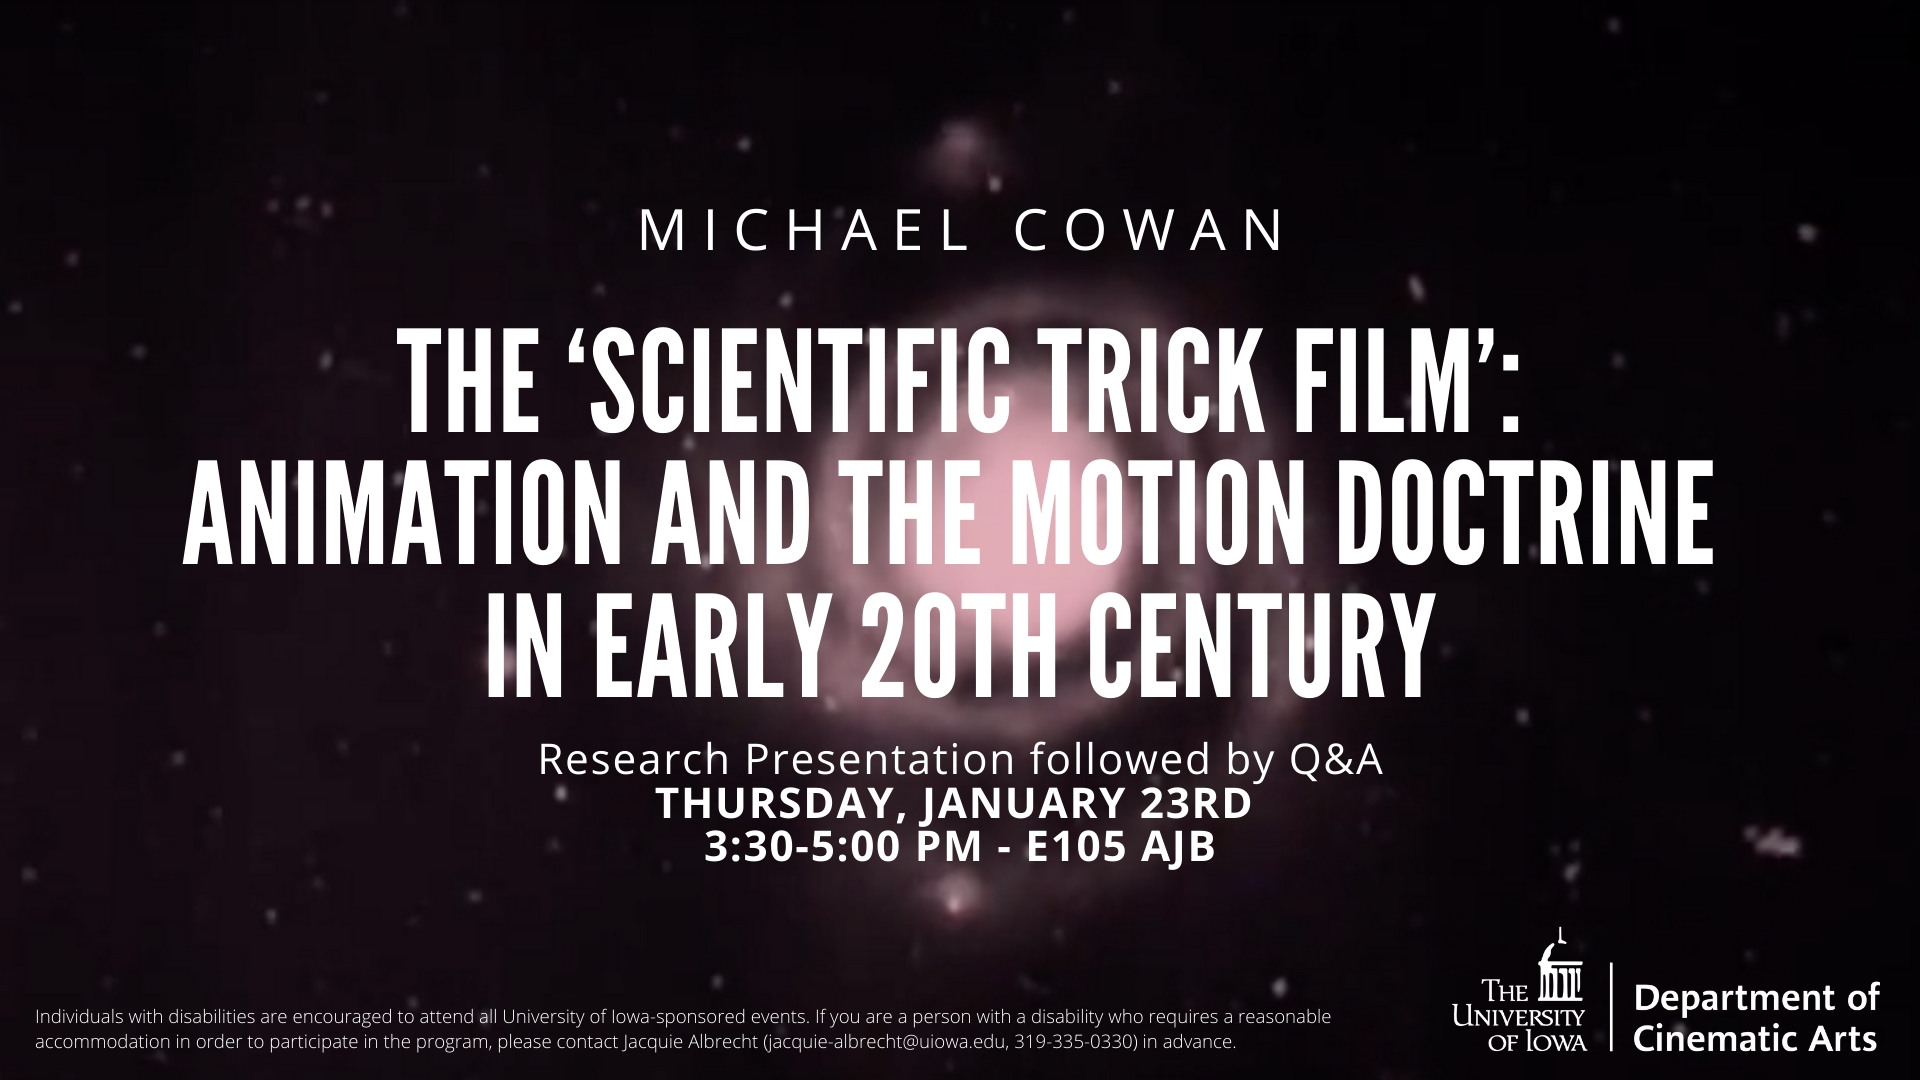 The 'scientific trick film': animation and the motion doctrine in early 20th century - January 23rd, 3:30-5 PM, E105 AJB